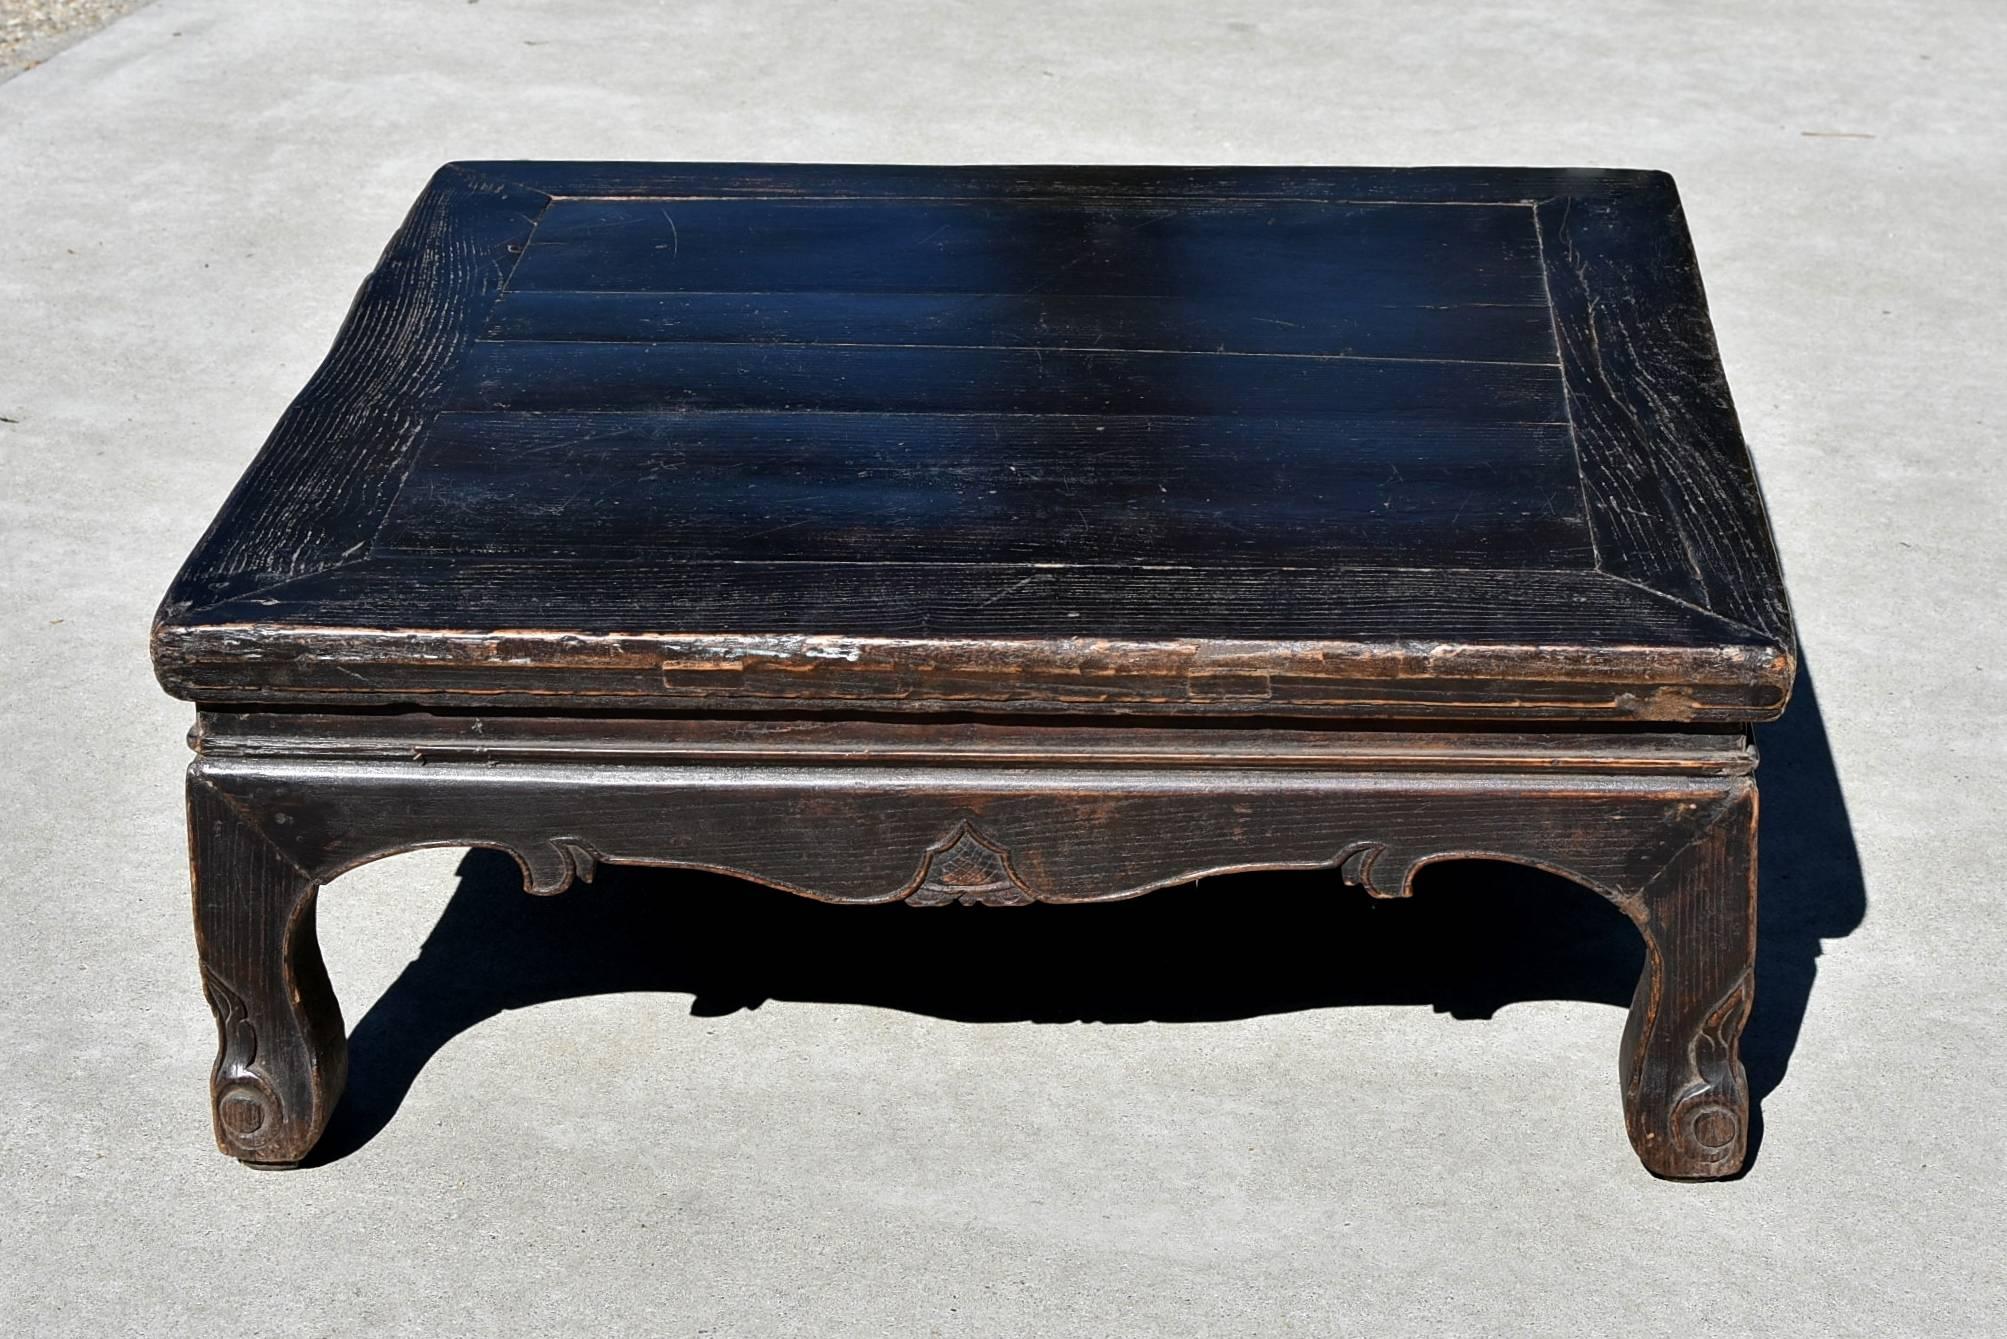 Beautiful 19th century Chinese table in solid wood. Such a piece is used in northern China on a structure called "Kang", a platform brick bed that is heated from underneath. In the northern extreme winters, Kang, is the place where most